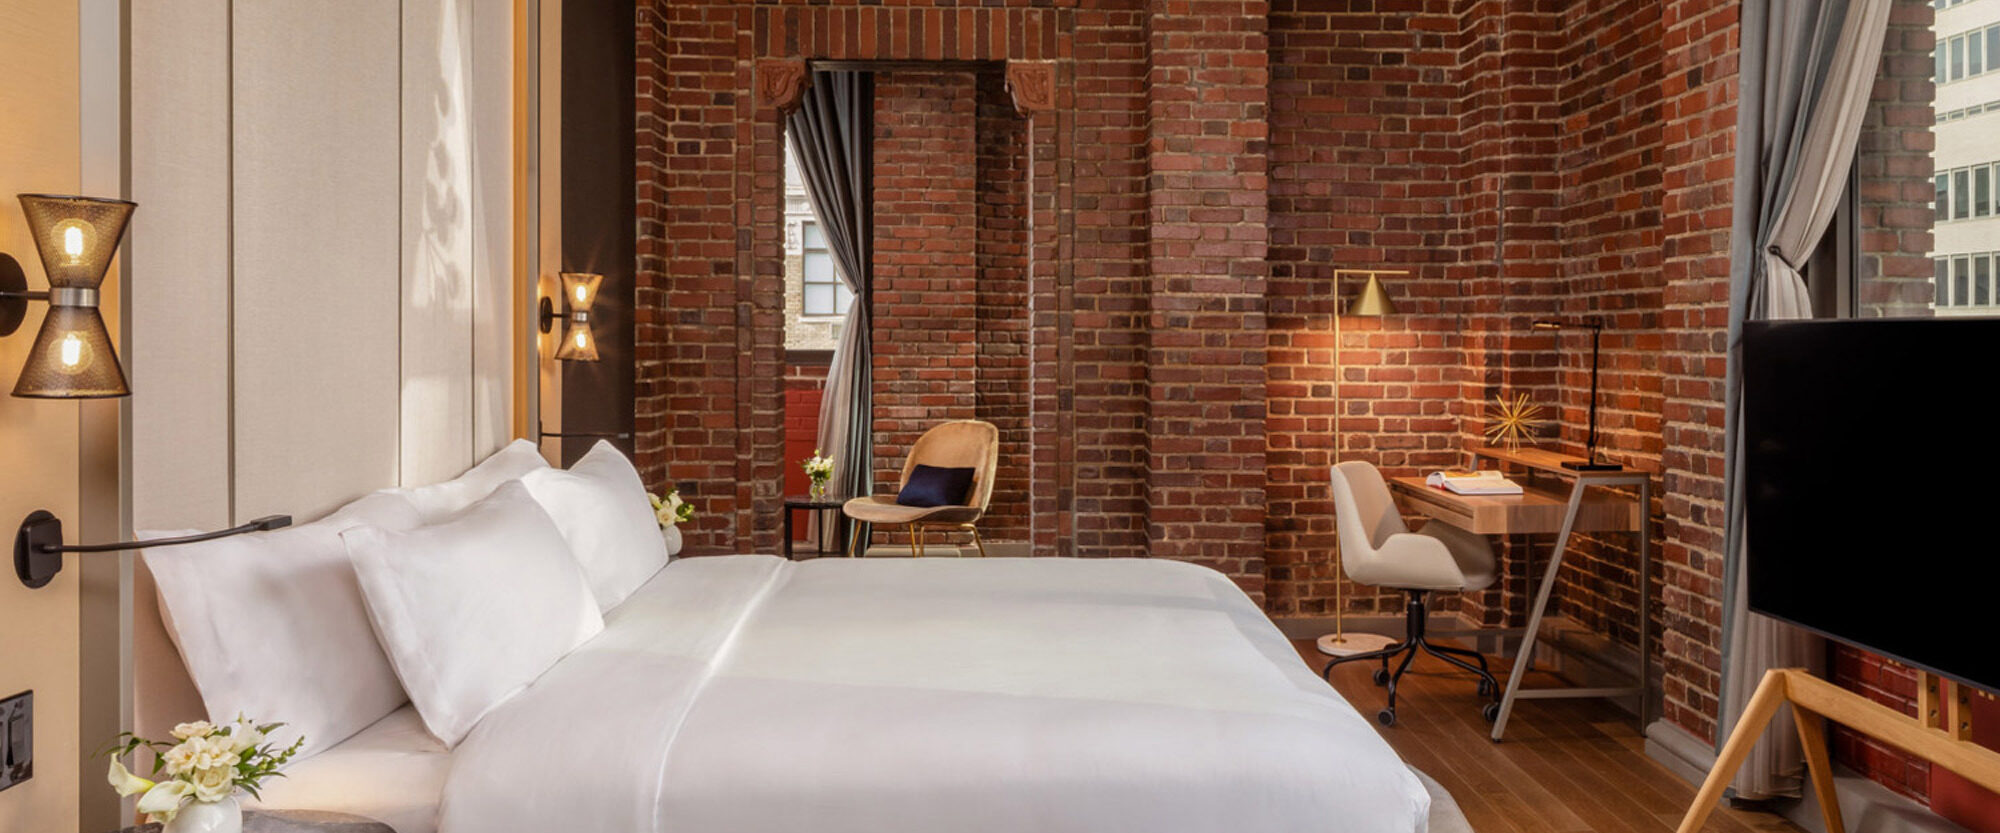 Elegantly appointed urban loft bedroom with exposed red brick walls and arched window, featuring a plush queen-sized bed, modernist lighting fixture above, and minimalist workspace to the side, blending industrial architecture with contemporary comfort.